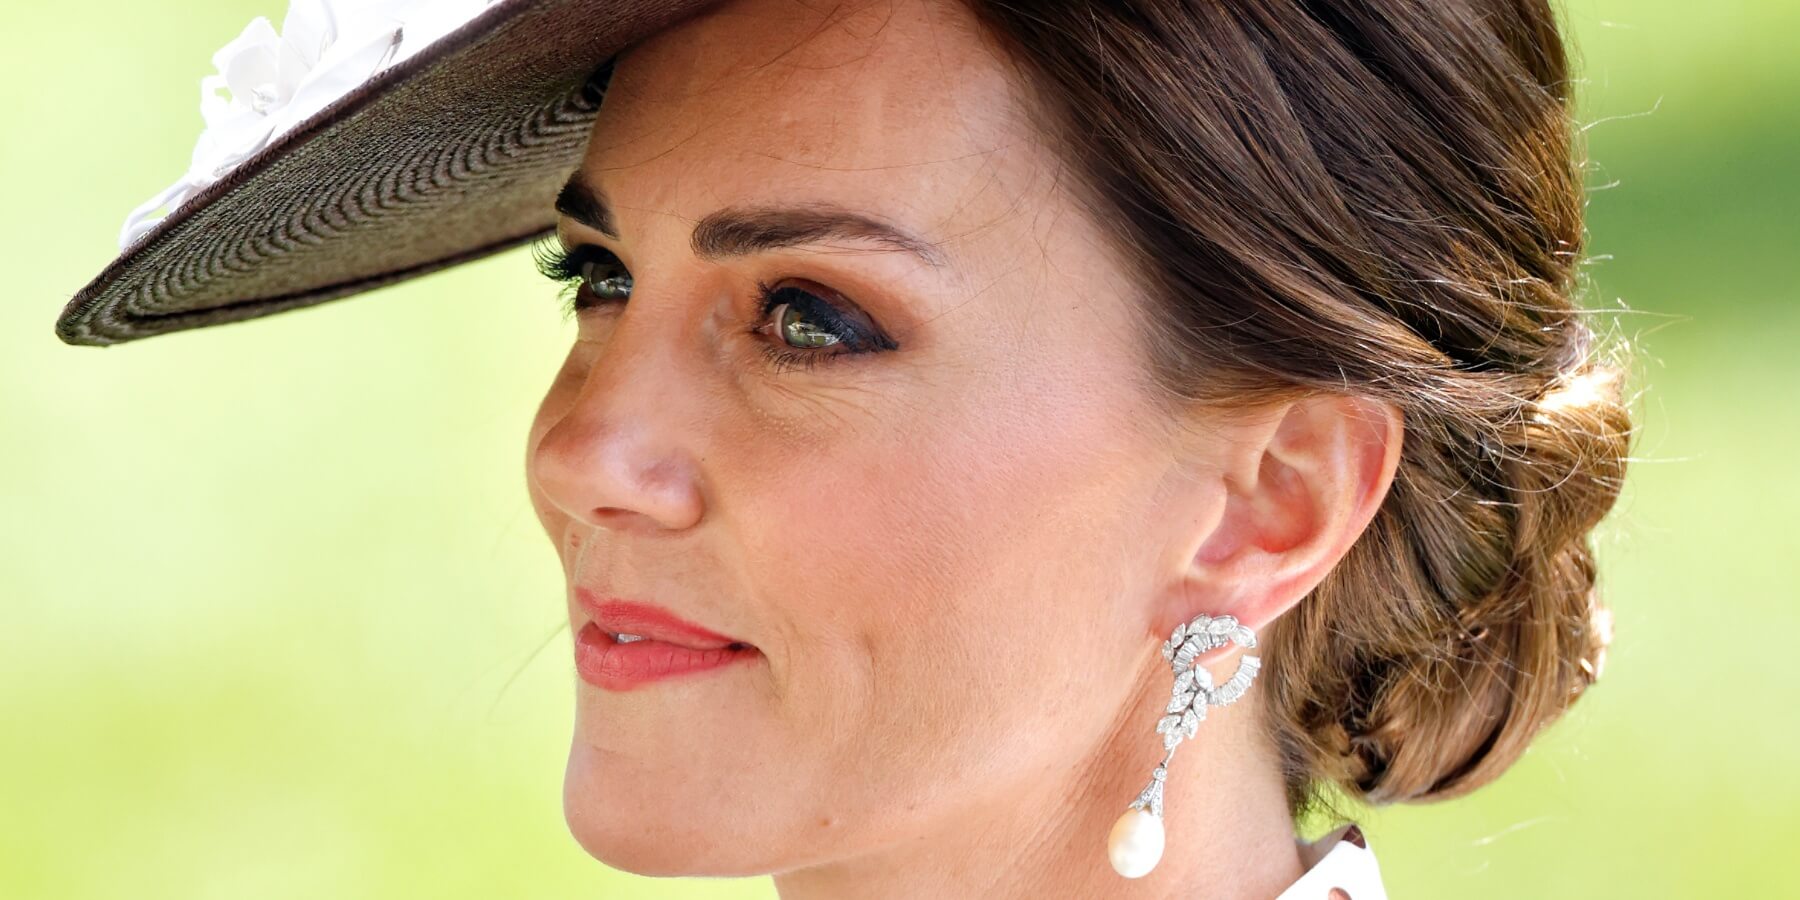 Kate Middleton photographed at Ascot Racecourse on June 17, 2022 in Ascot, England.